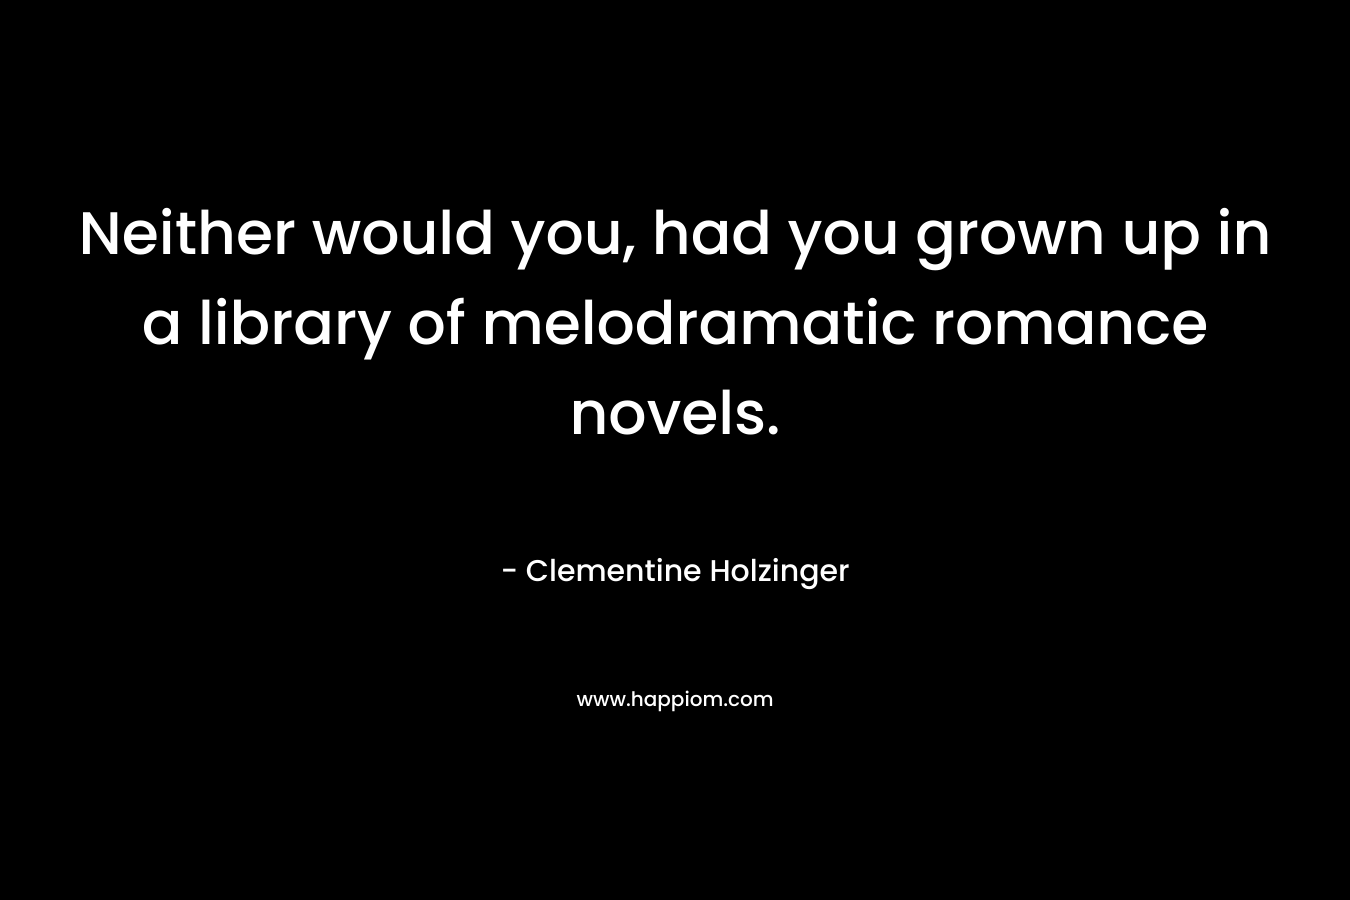 Neither would you, had you grown up in a library of melodramatic romance novels. – Clementine Holzinger